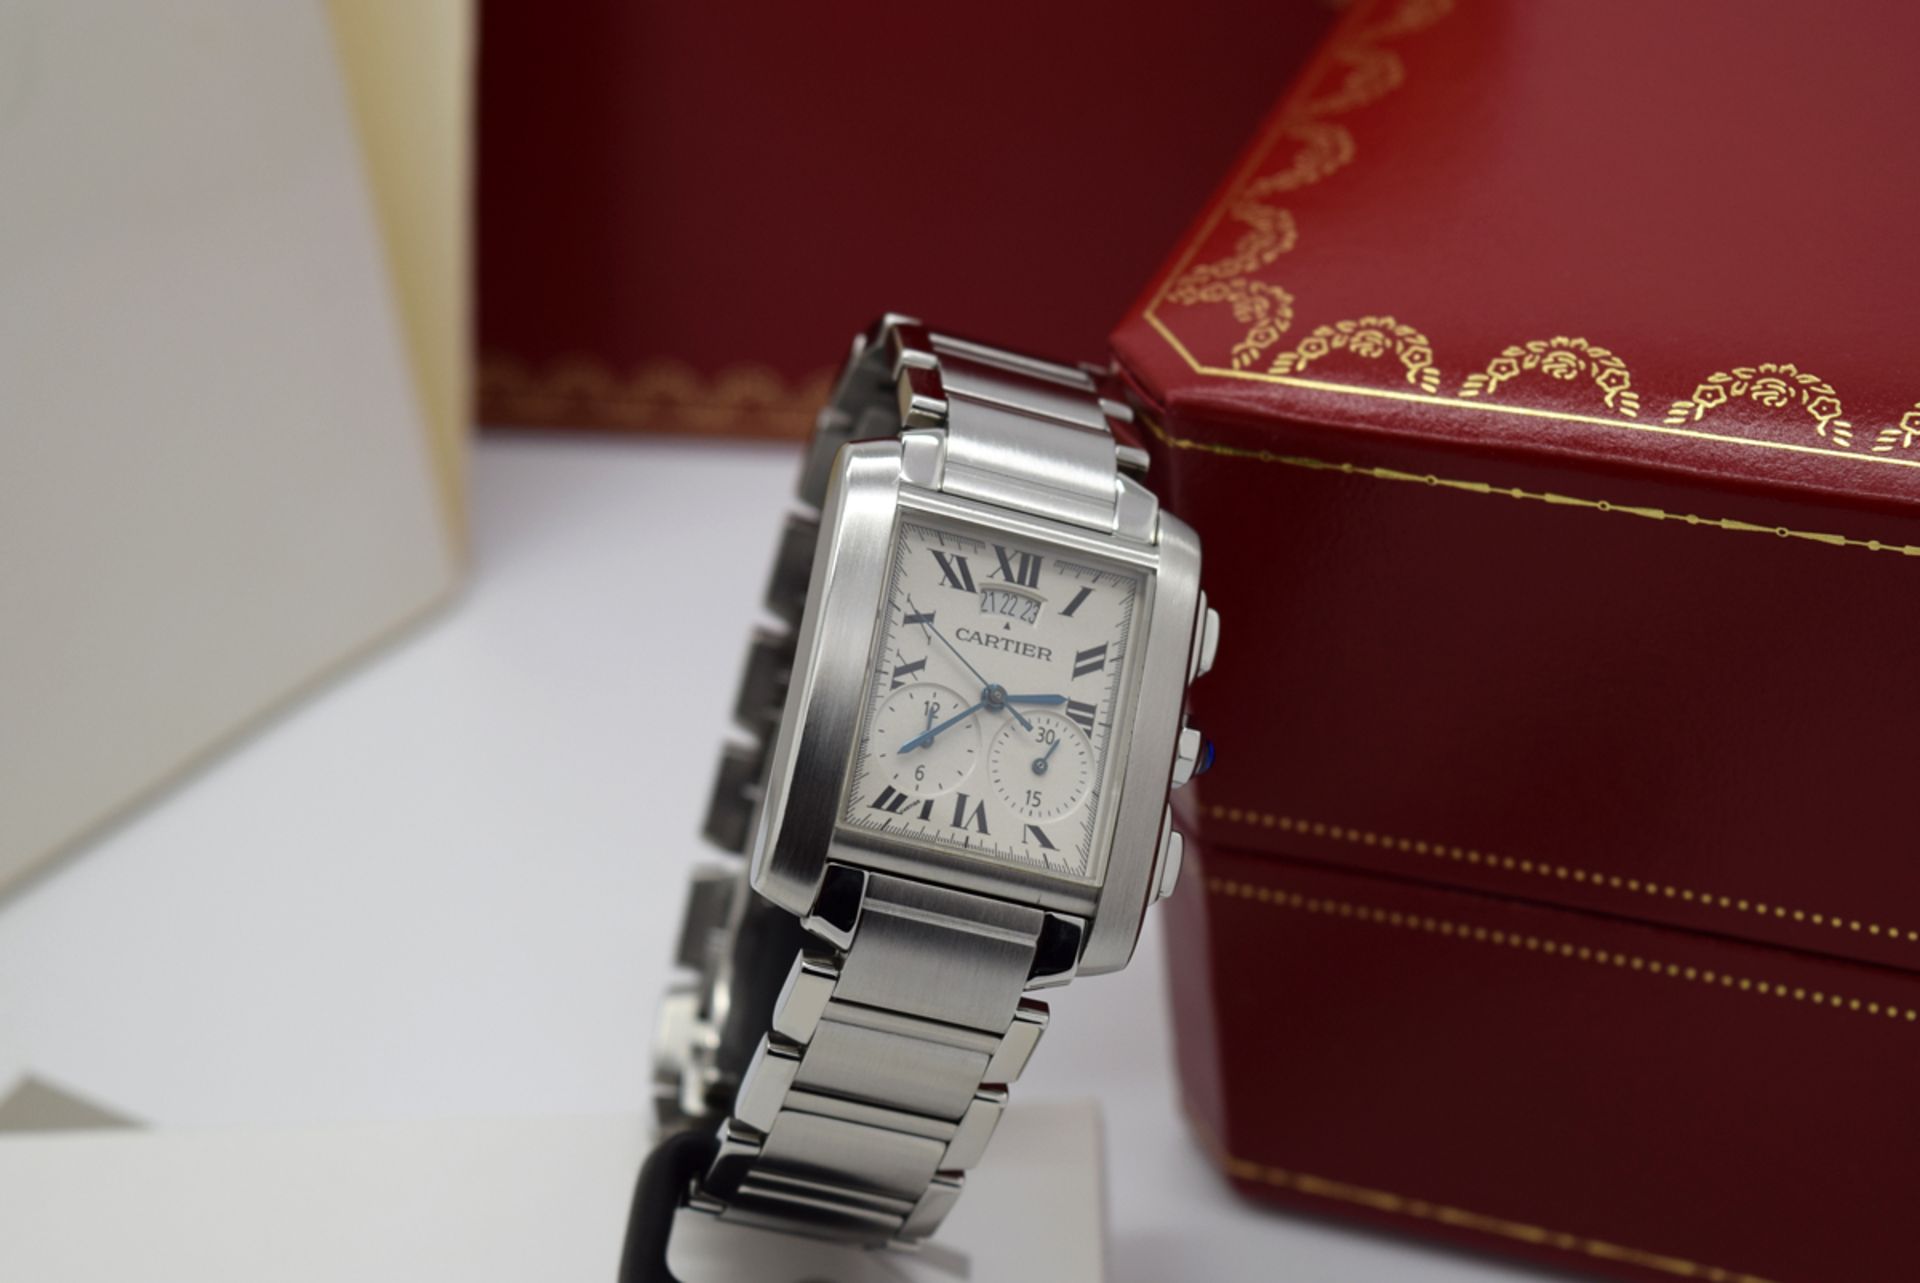 MENS CARTIER TANK CHRONOGRAPH - STAINLESS STEEL (2653 - W51024Q3) - Image 11 of 12